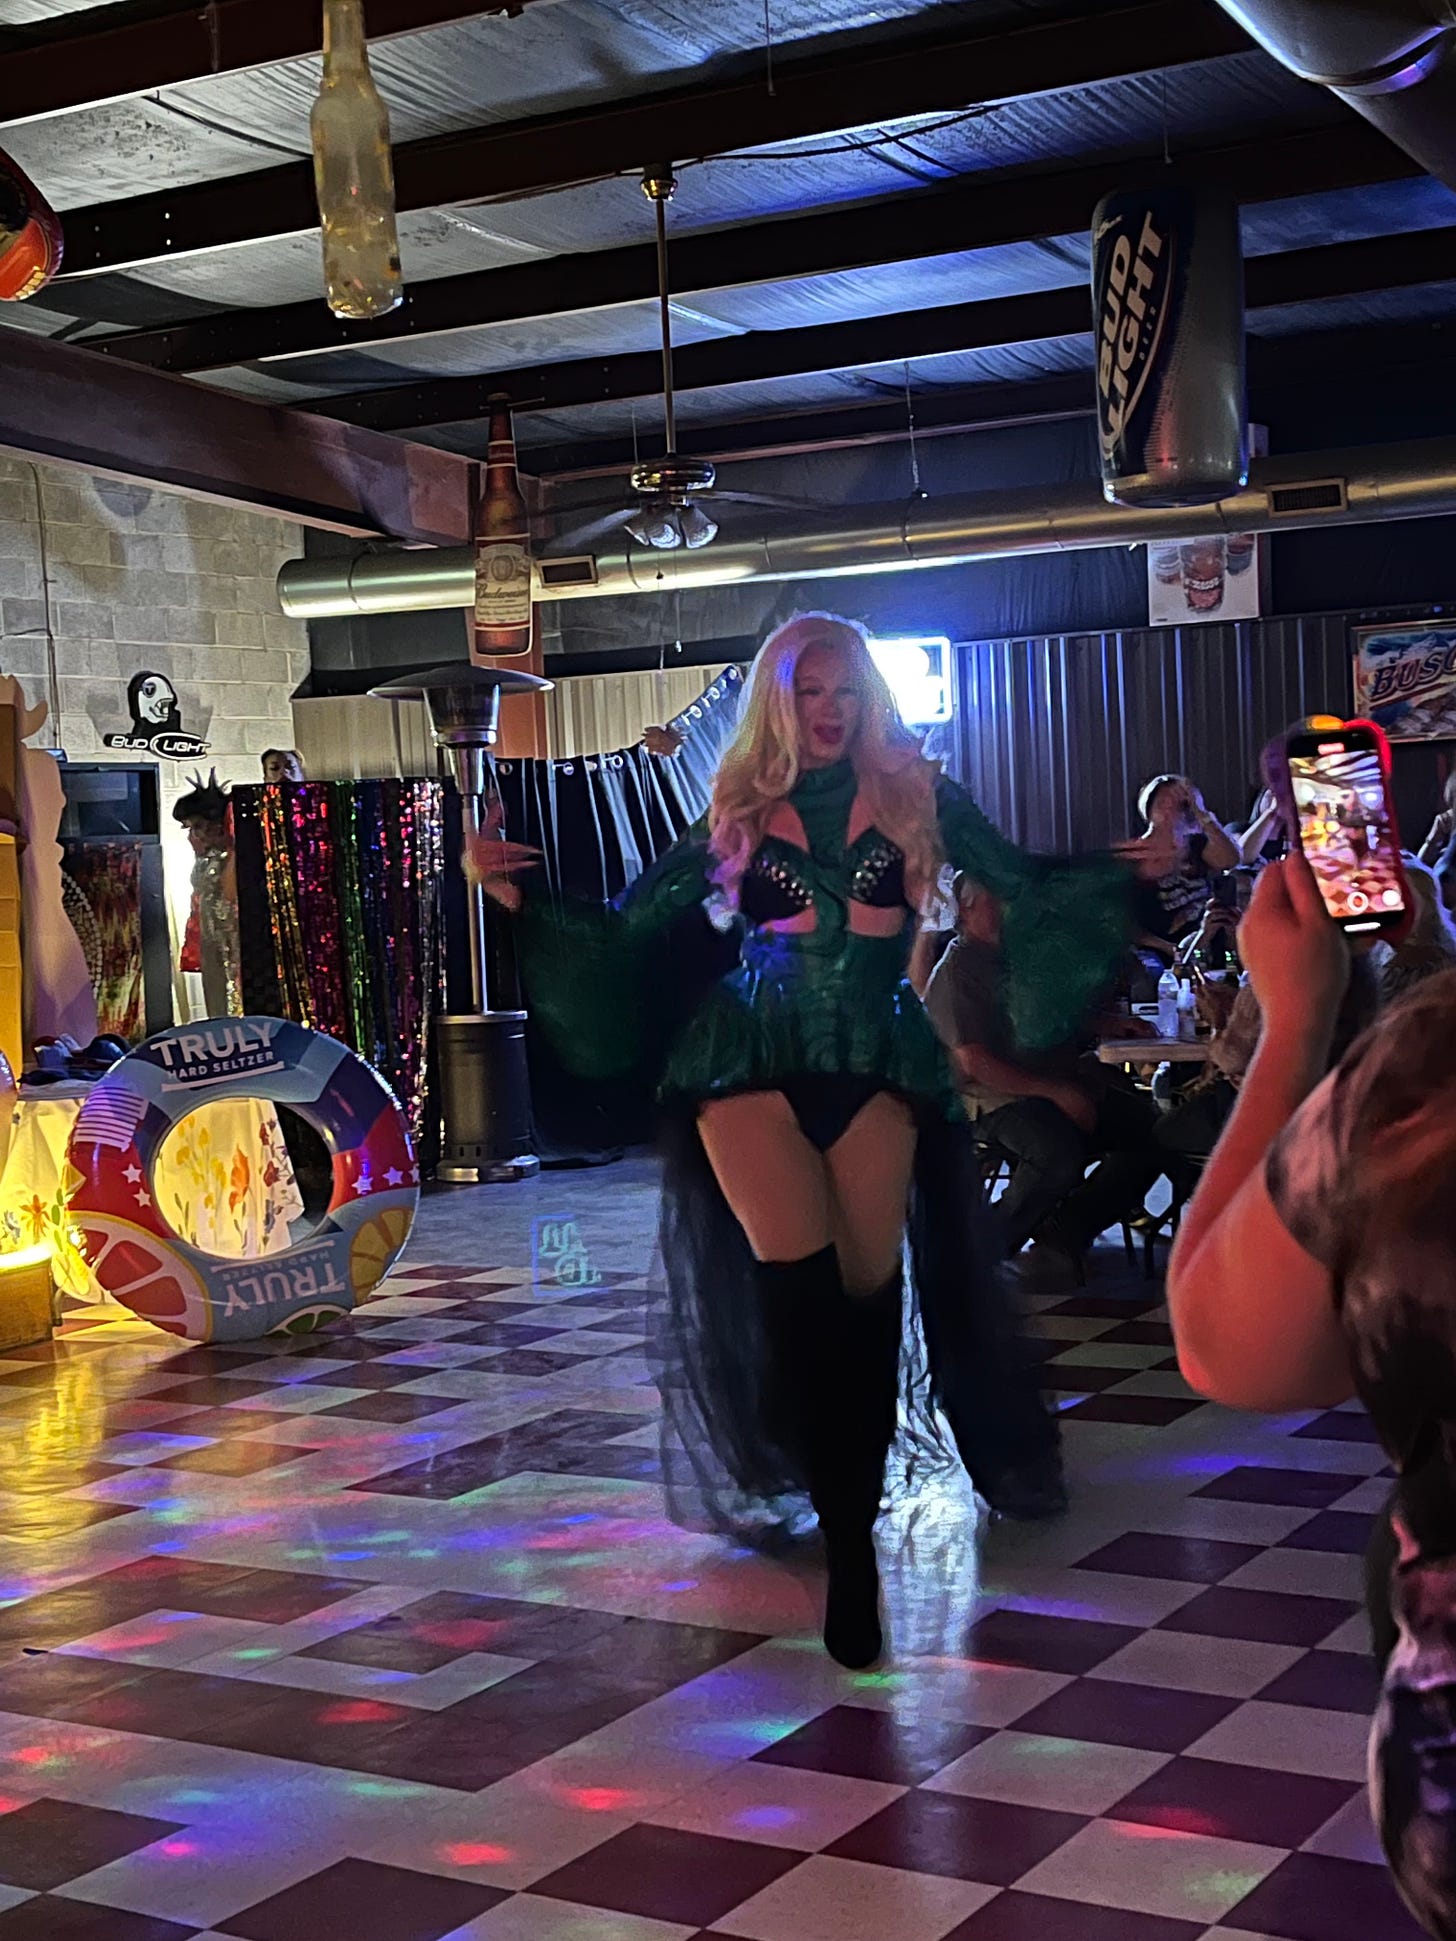 A drag queen with blonde hair an a green cut-out outfit struts during her performance at Good Times Bar.